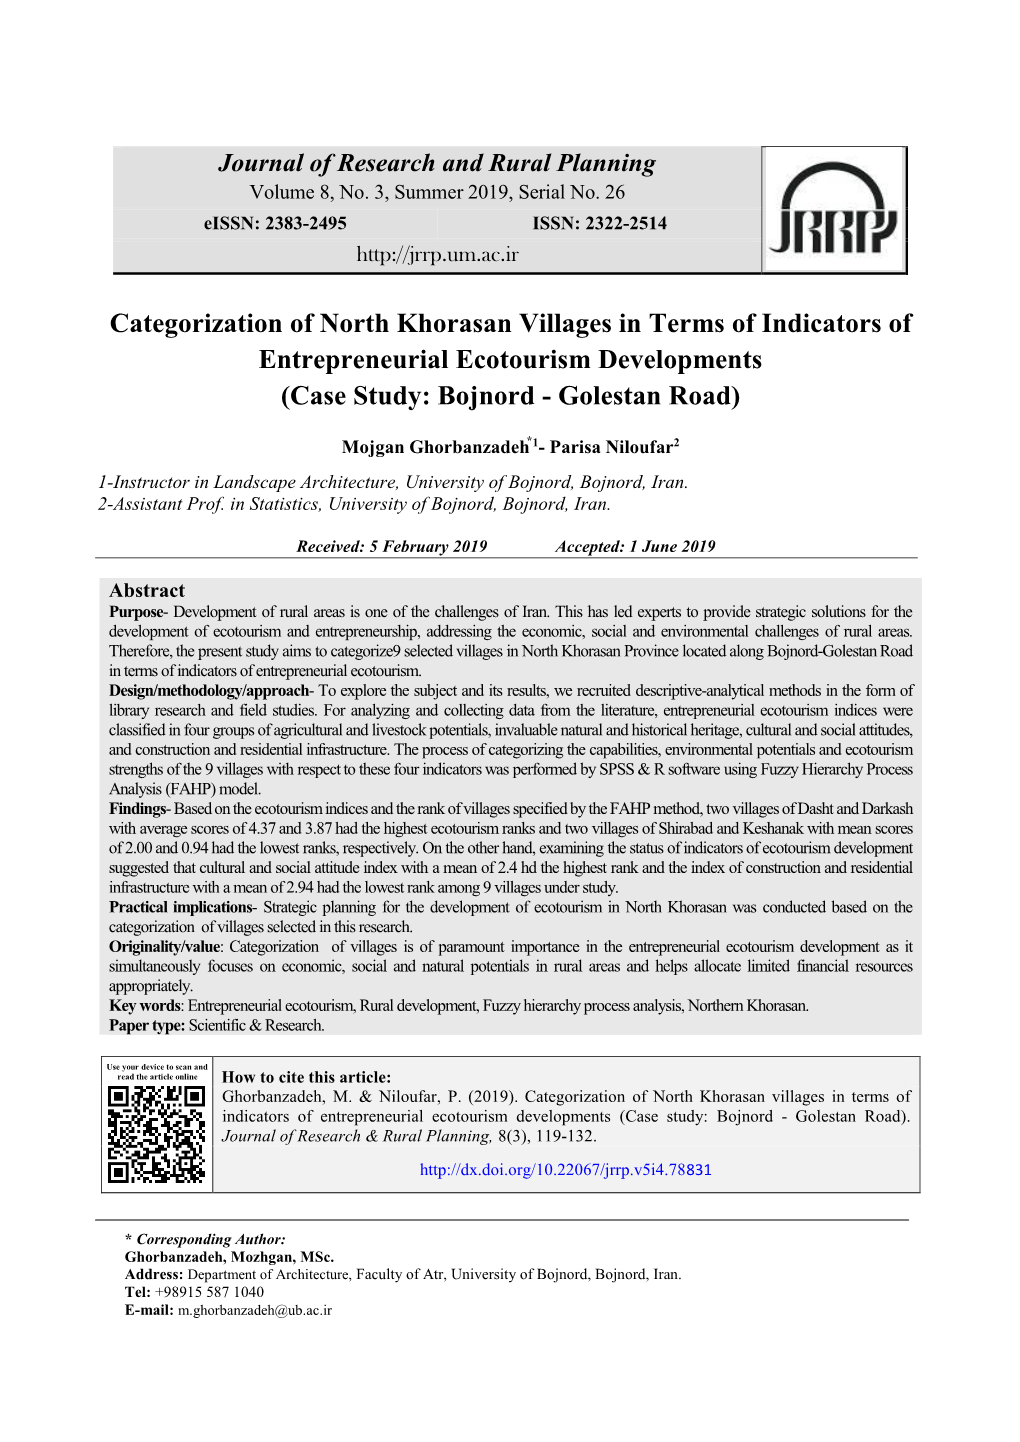 Categorization of North Khorasan Villages in Terms of Indicators of Entrepreneurial Ecotourism Developments (Case Study: Bojnord - Golestan Road)